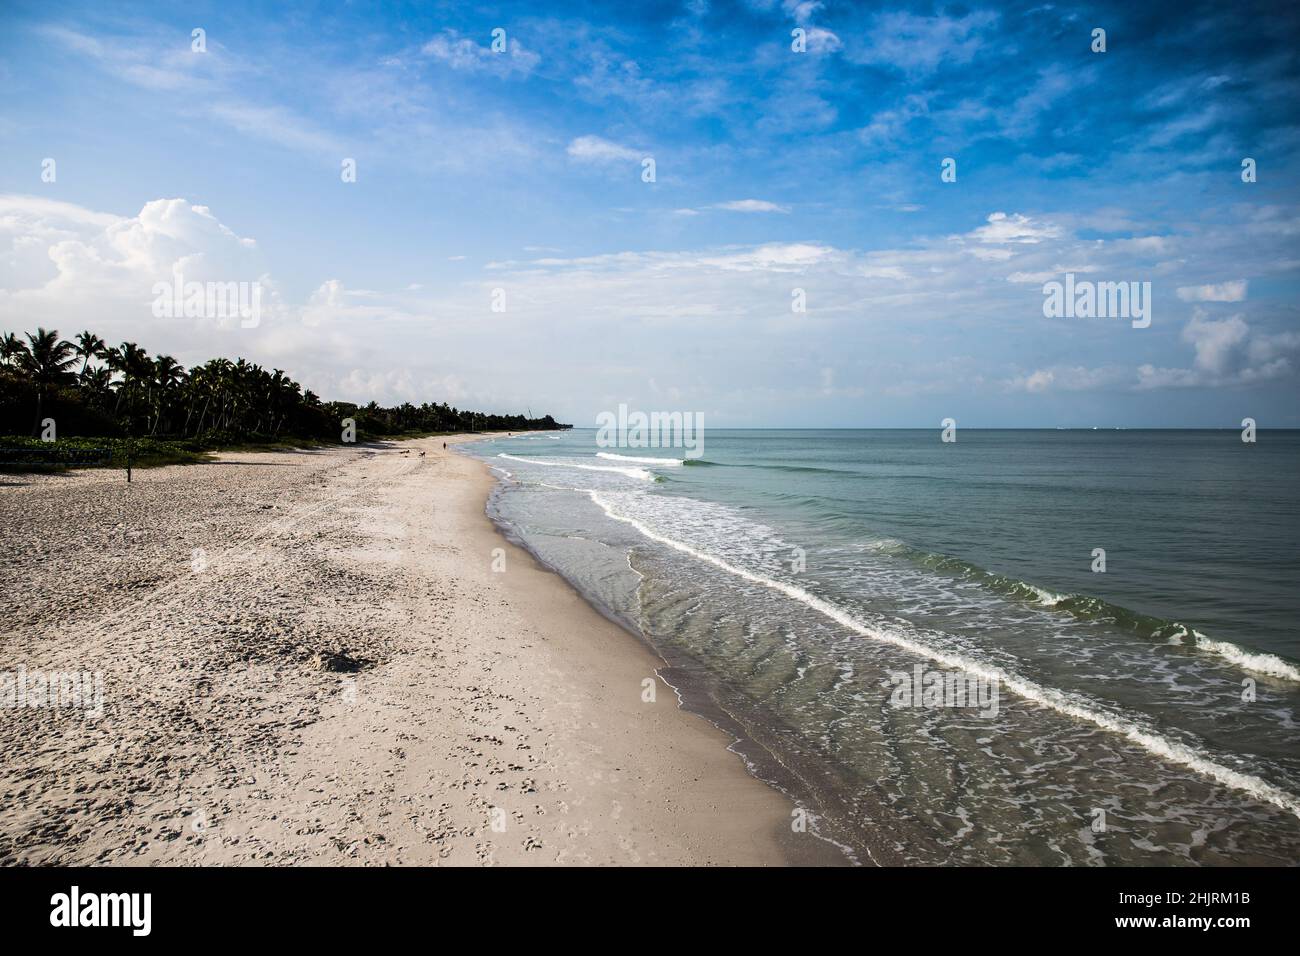 Let the leading edge of this beach lead you away down the shore. This is a beautiful view down the shore line of the beach in Naples Florida. Stock Photo